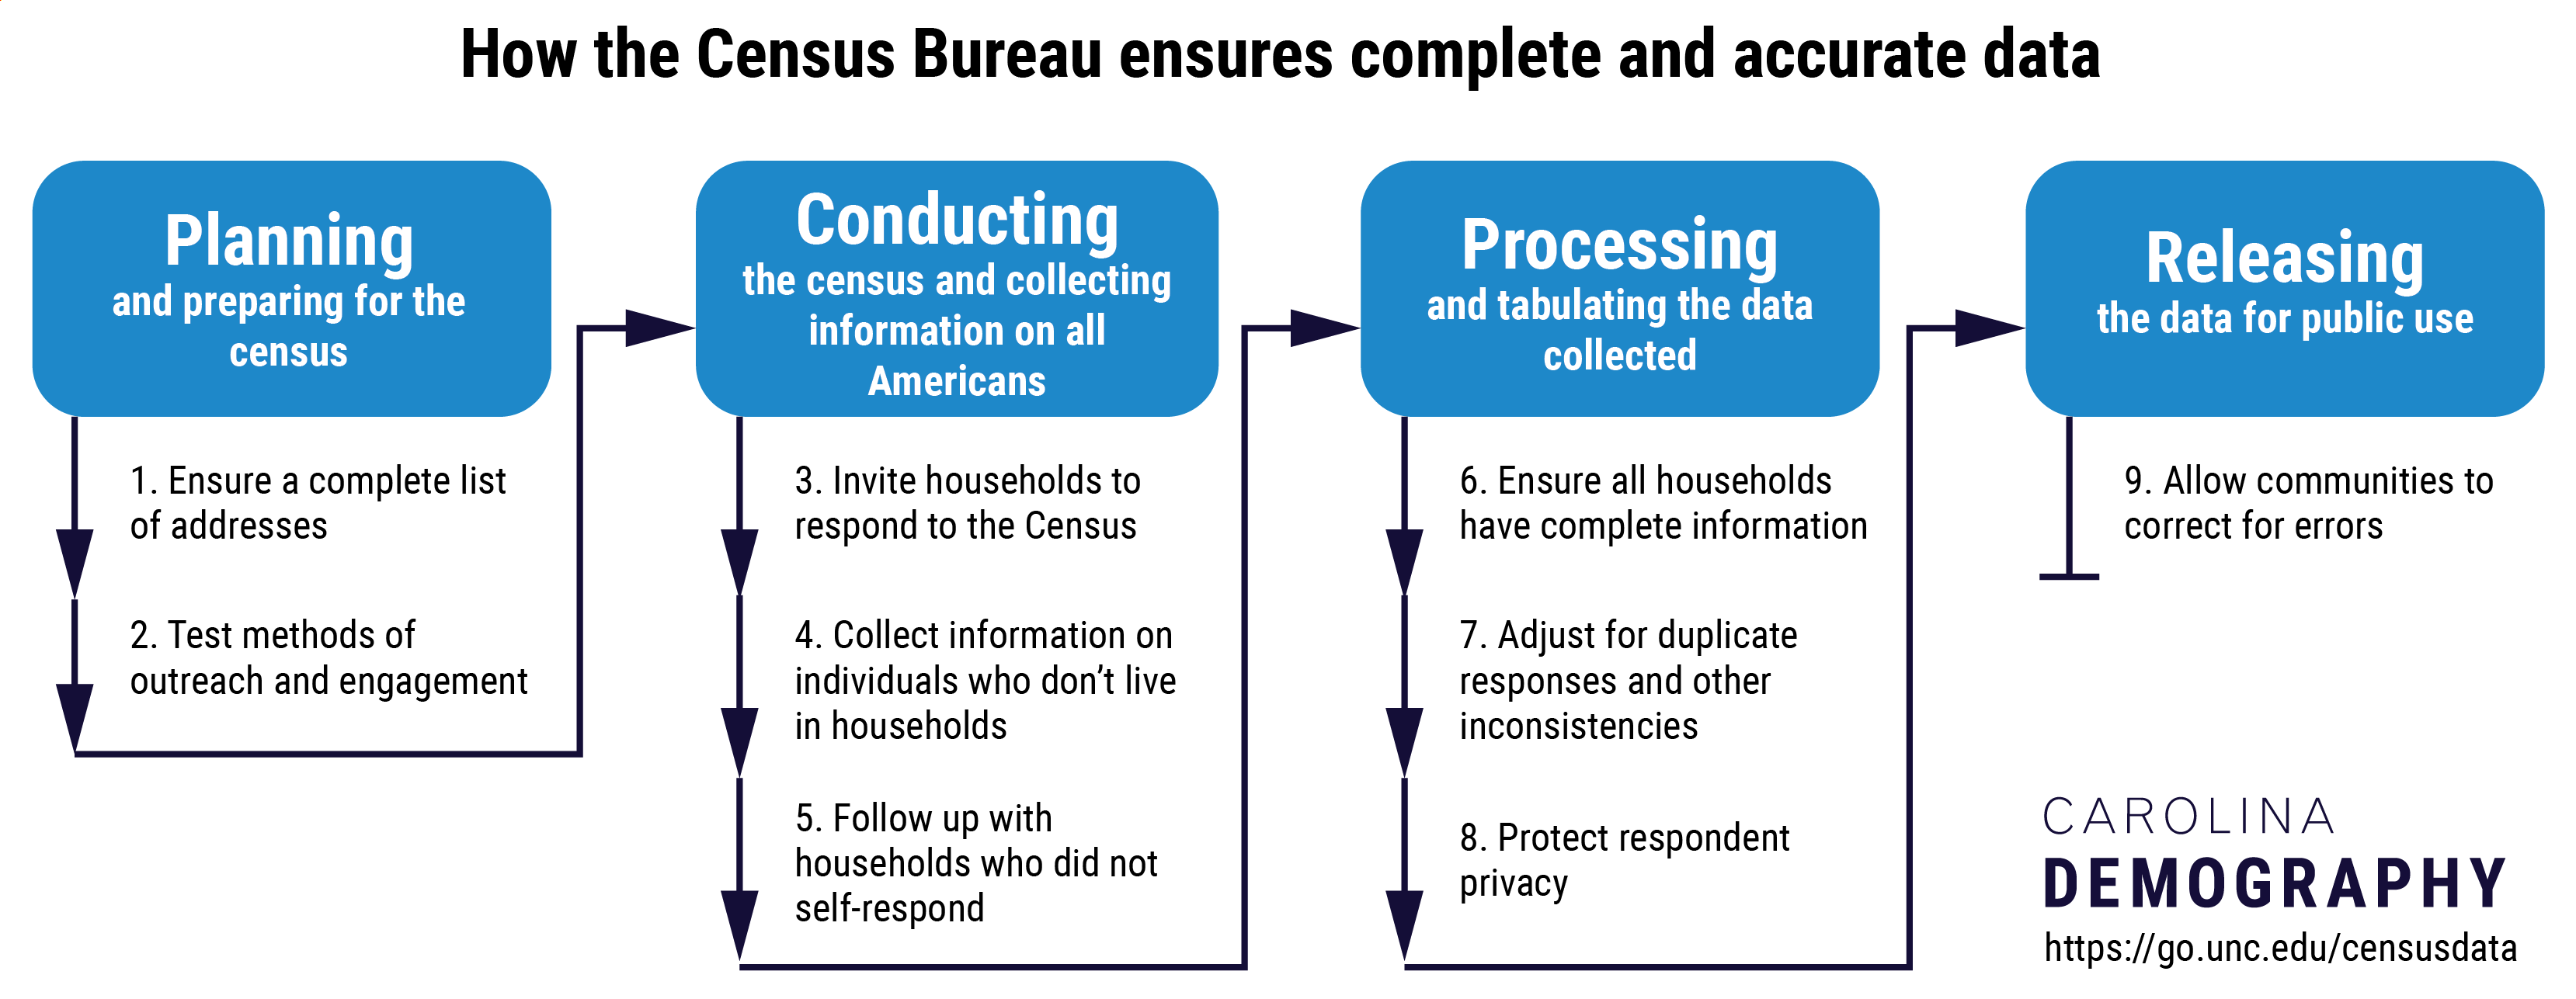 How the Census Bureau ensures complete and accurate data